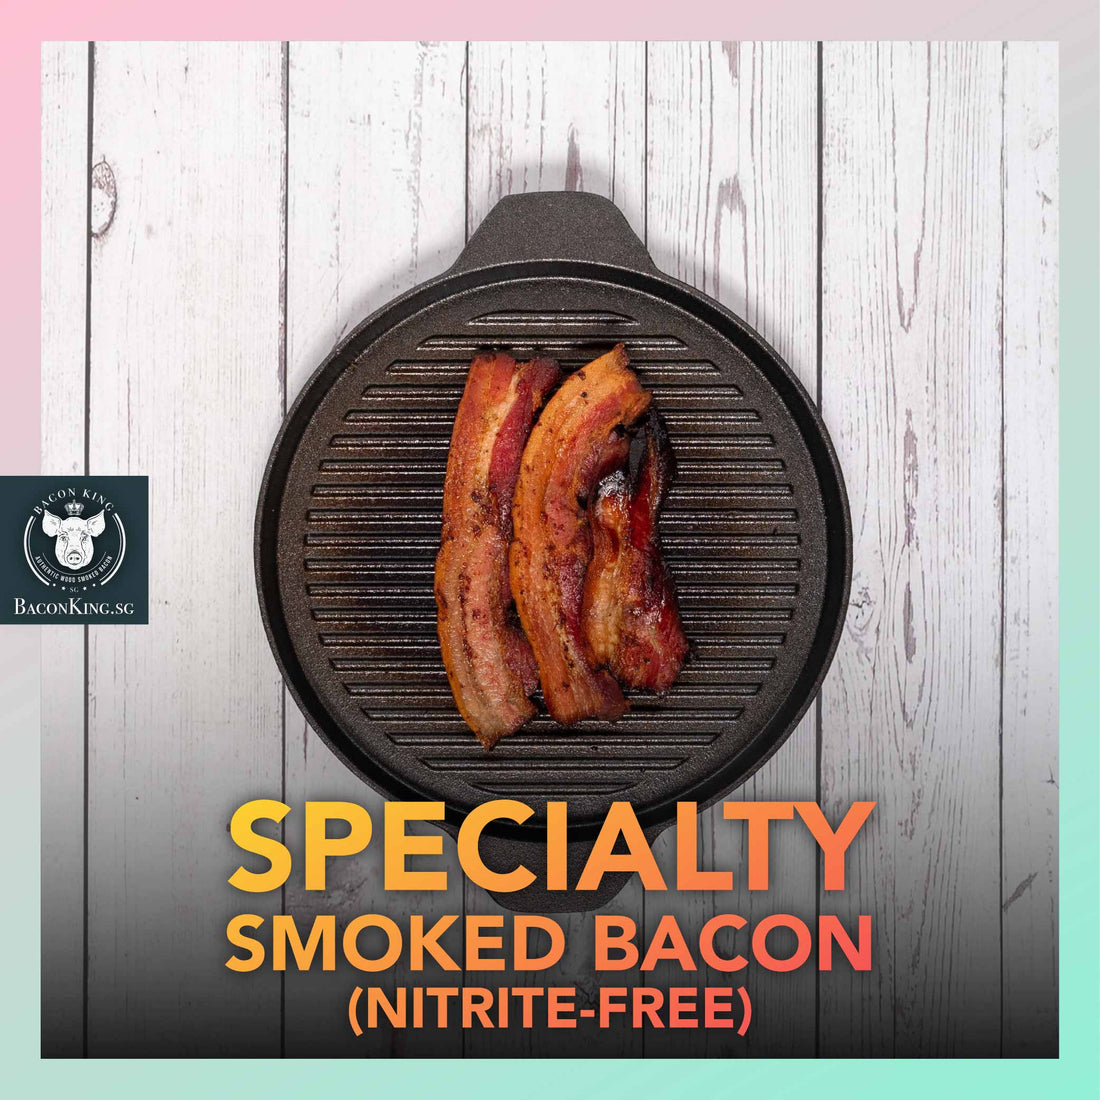 Slices of Nitrite-free Specialty Smoked Bacon on Stone Plate with Bay Leaves, Rosemary, Thyme, Cloves, Applewood chips decorating the side, against a marble background